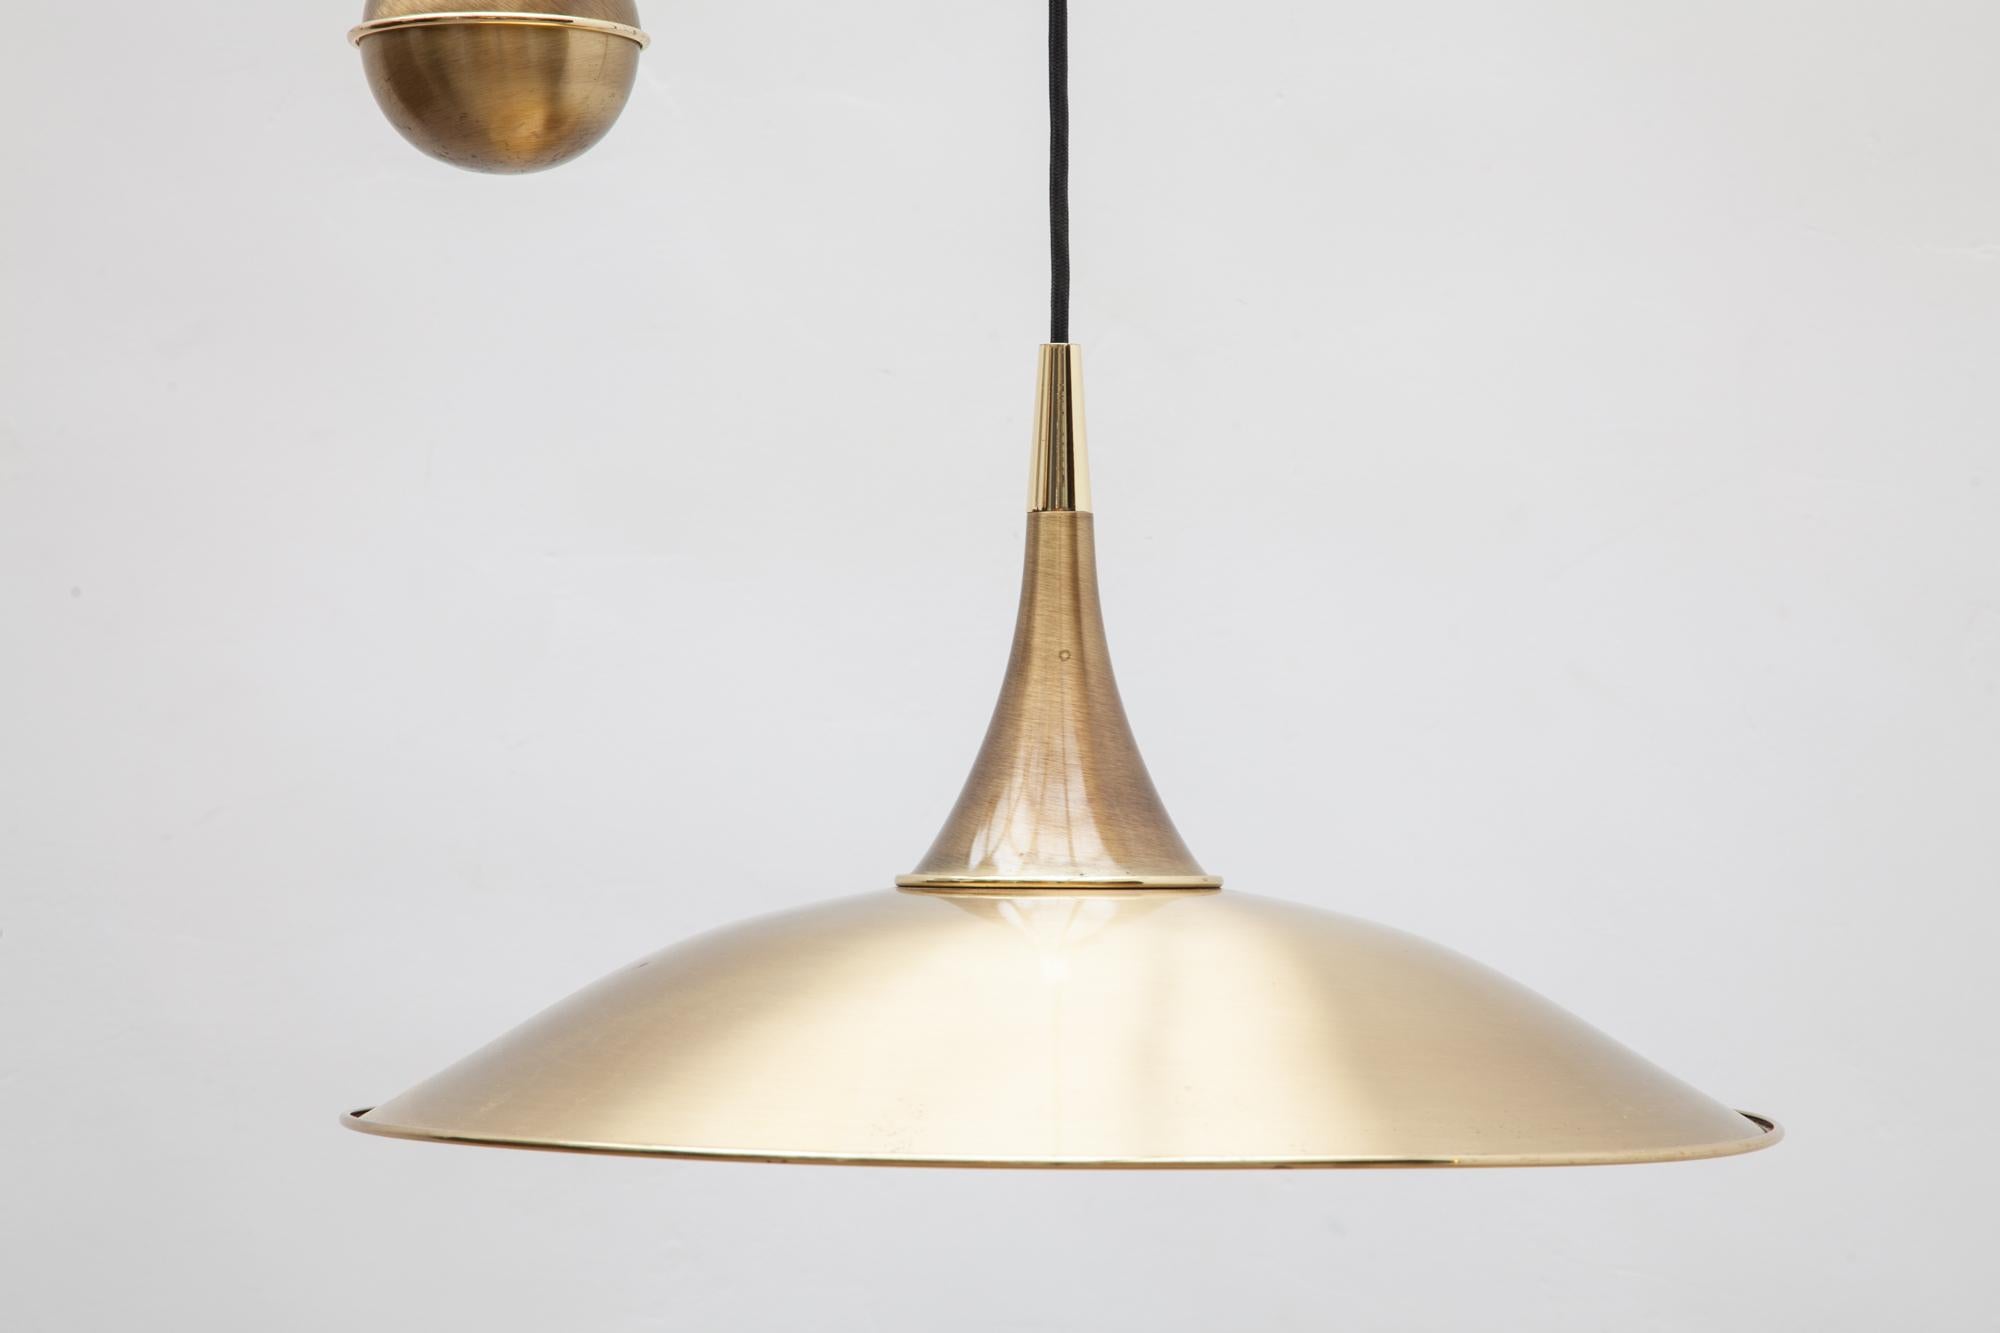 Beautiful shaped Onos 55 counterbalance pendant light by Florian Schulz, Germany. Modernist brushed brass shade and ball. The height can be adjusted by raising or lowering the weighted ball.
Dimensions: Height 120 cm
Shade: 58 cm diameter.